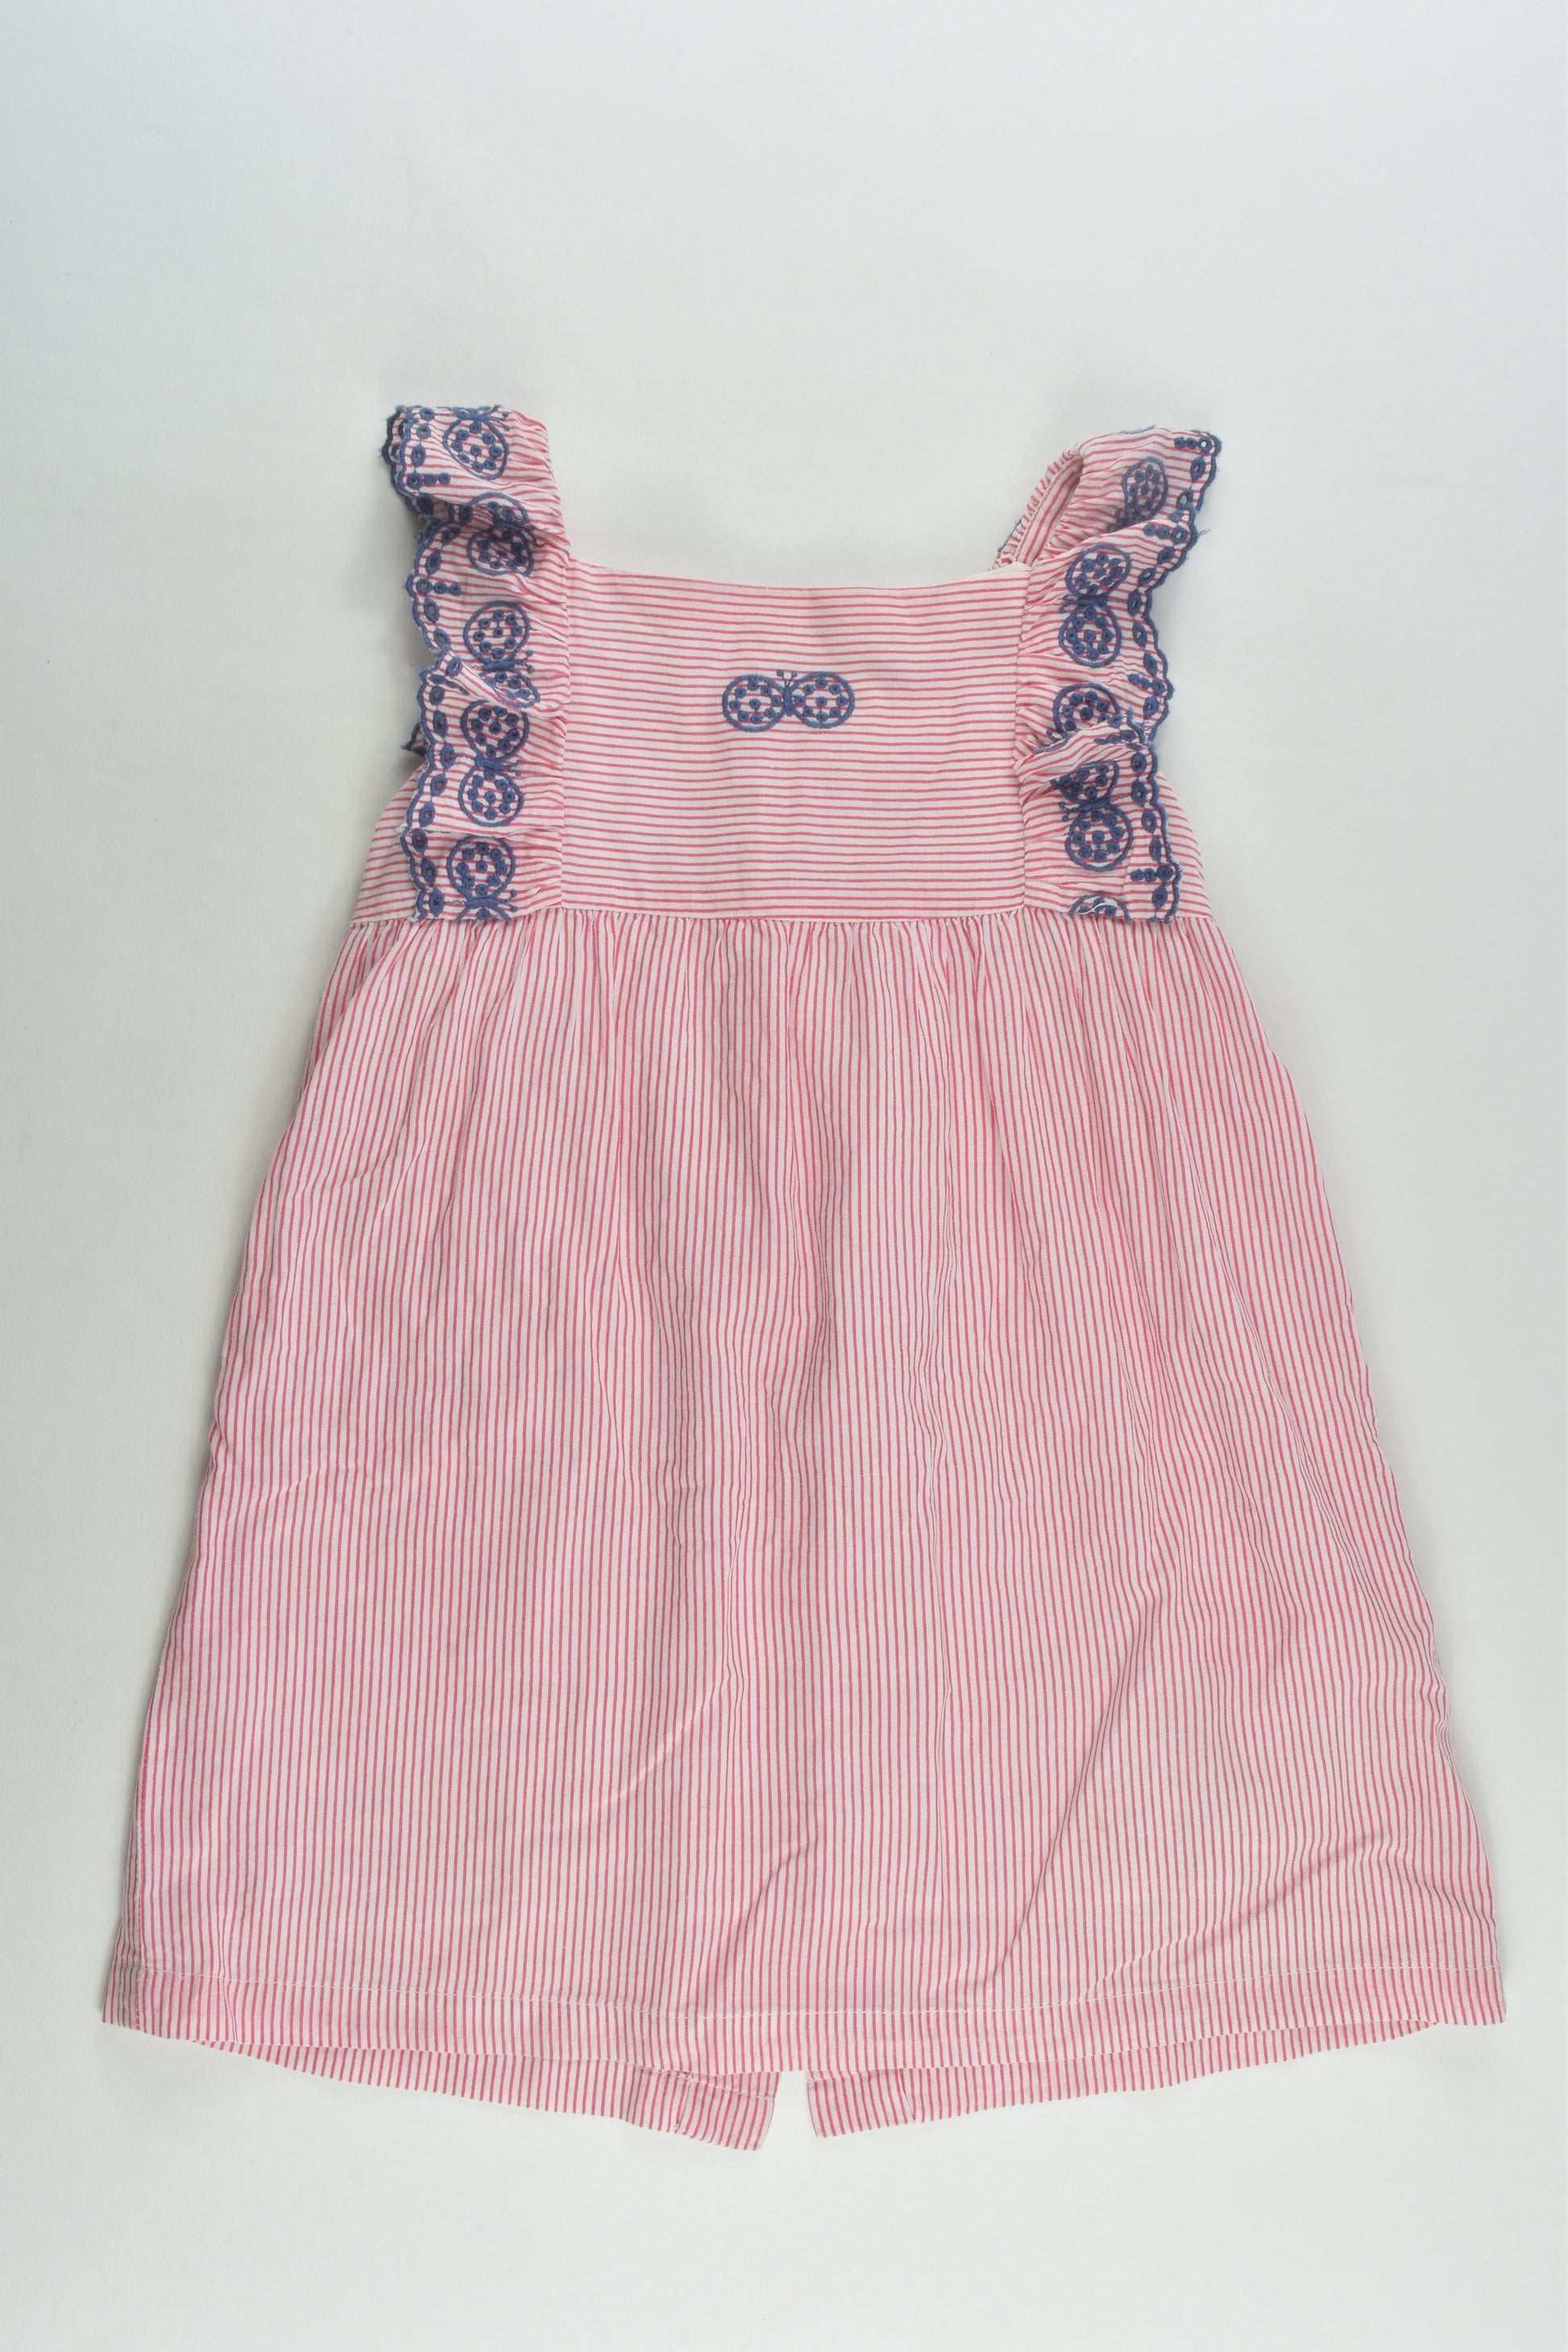 Jack & Milly Size 1 Striped Lined Dress with Butterfly Embroidery